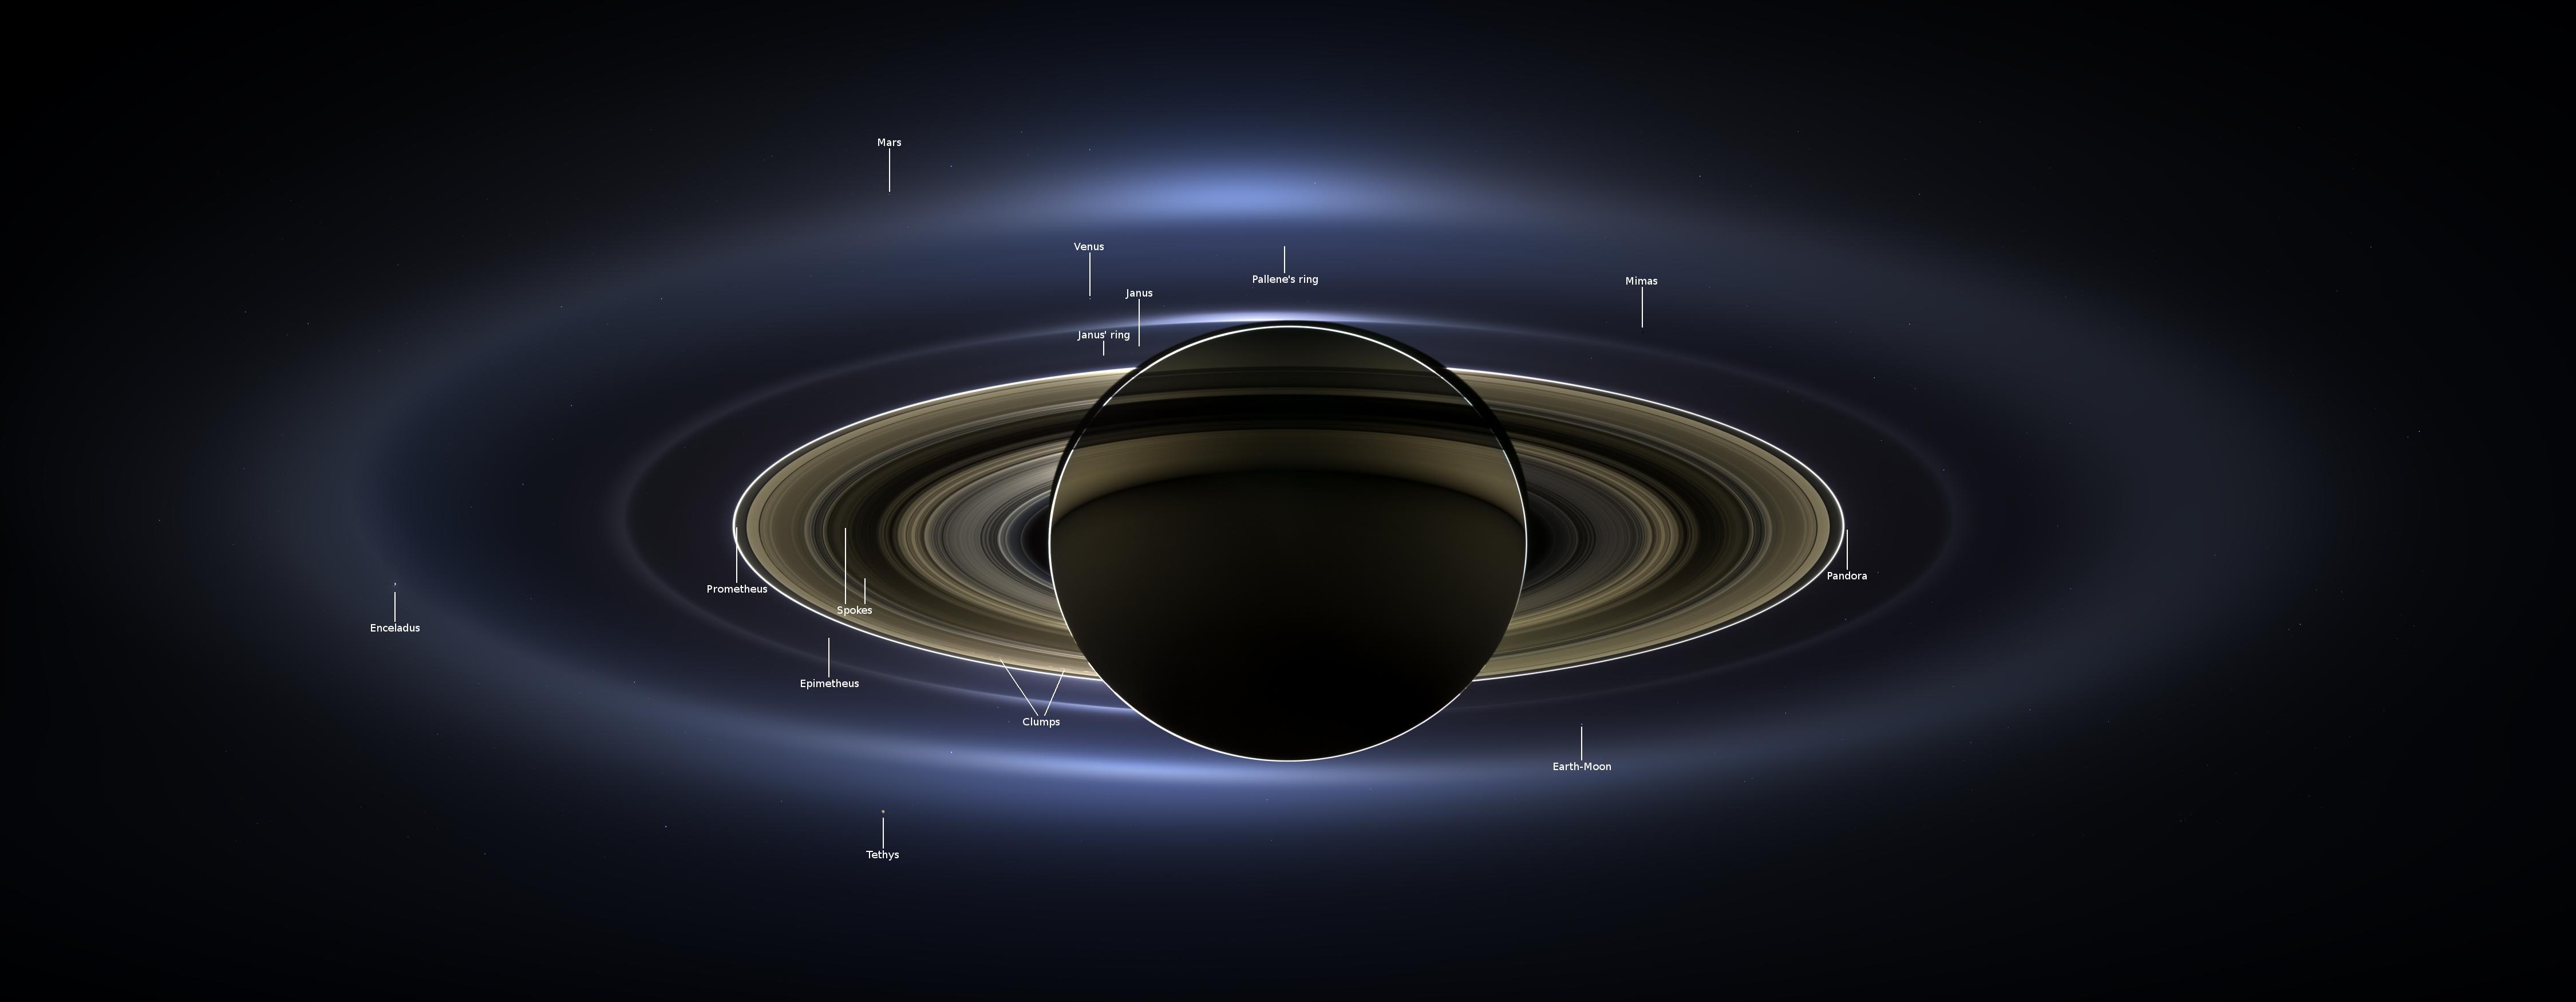 Saturn is seen as a black circle in the center with the rings backlit by the sun. A ring of blue haze reflects sunlight from the inner rings of Saturn. Small dots in the image are seven of Saturn’s moons, Mars, Venus, and our own Earth.